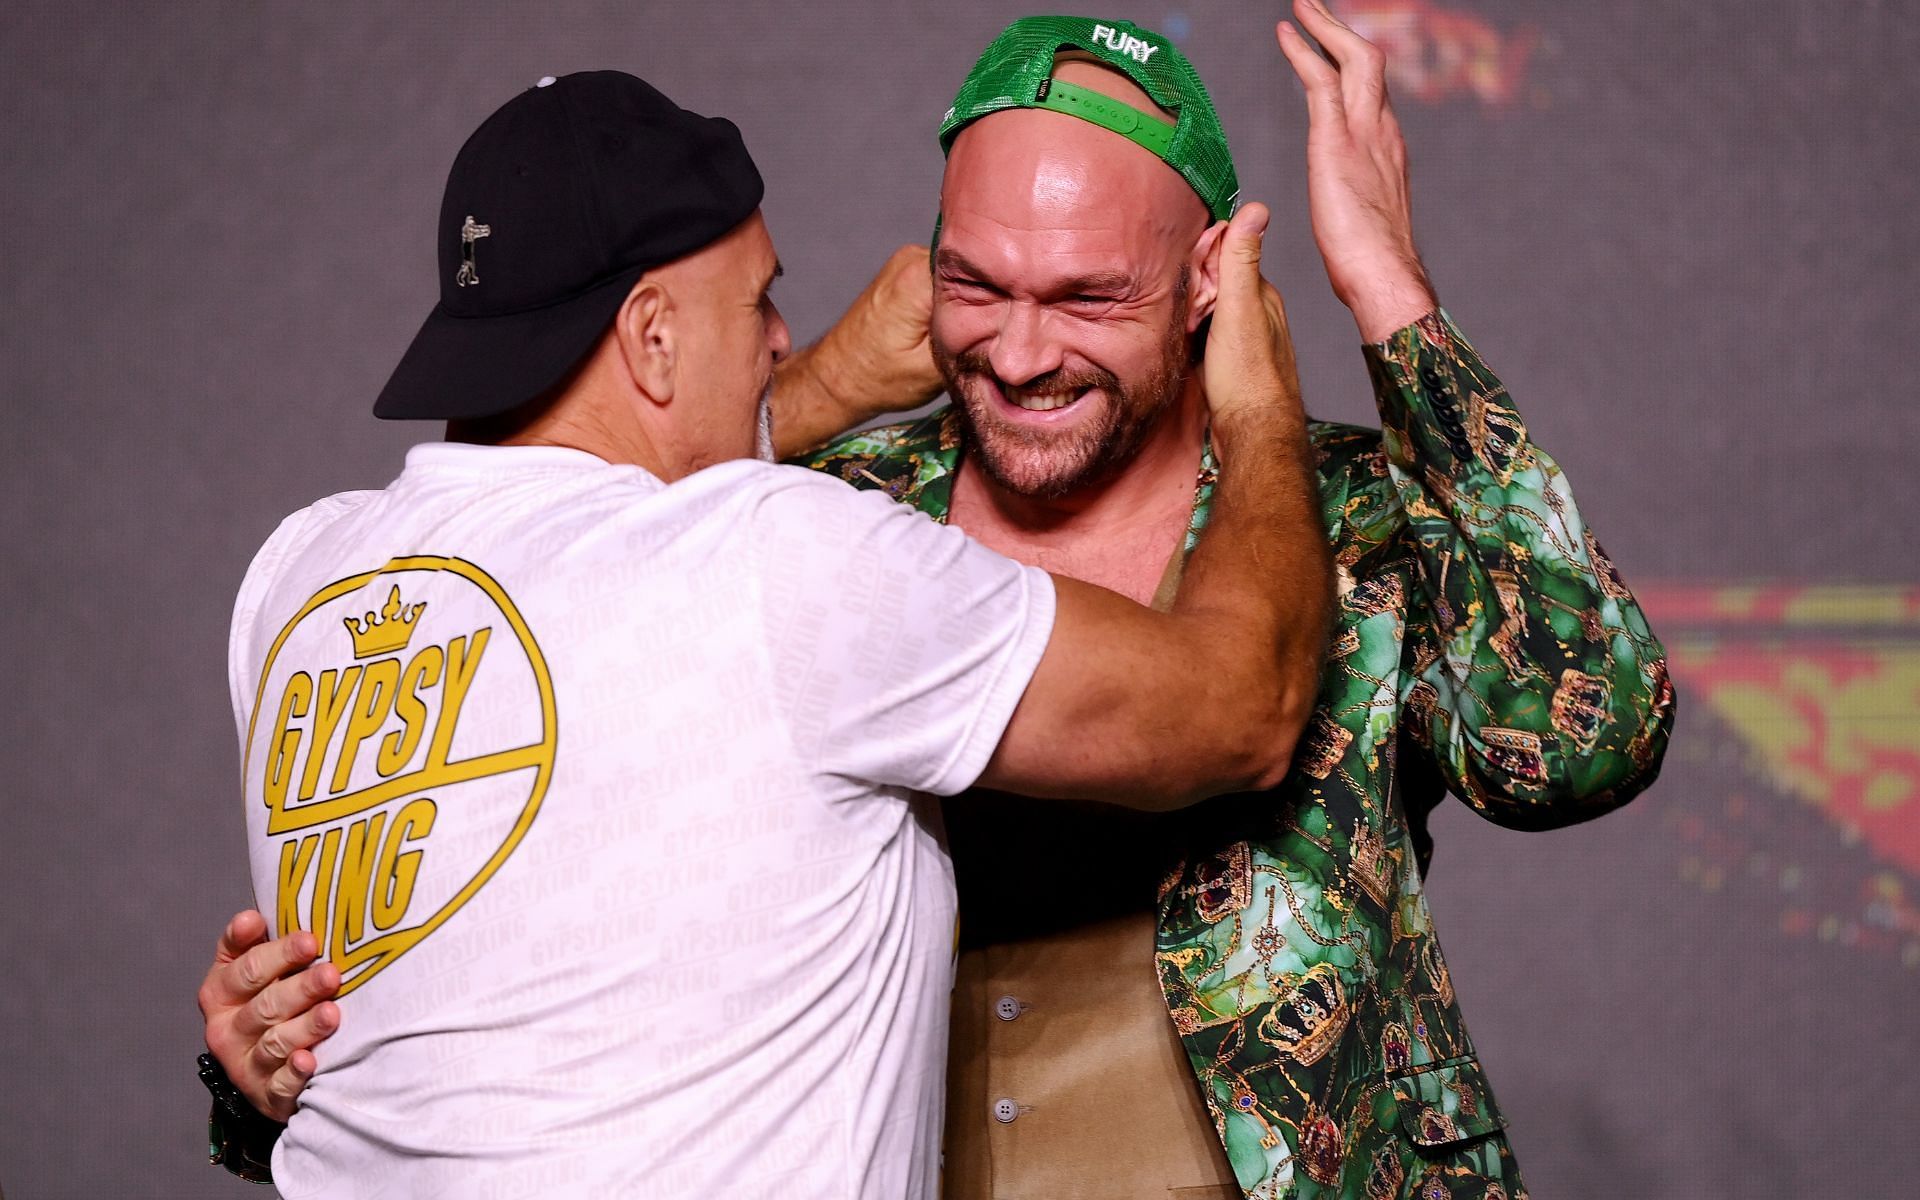 John Fury (left) and Tyson Fury (right) are known to share a close bond [Image courtesy: Getty Images]